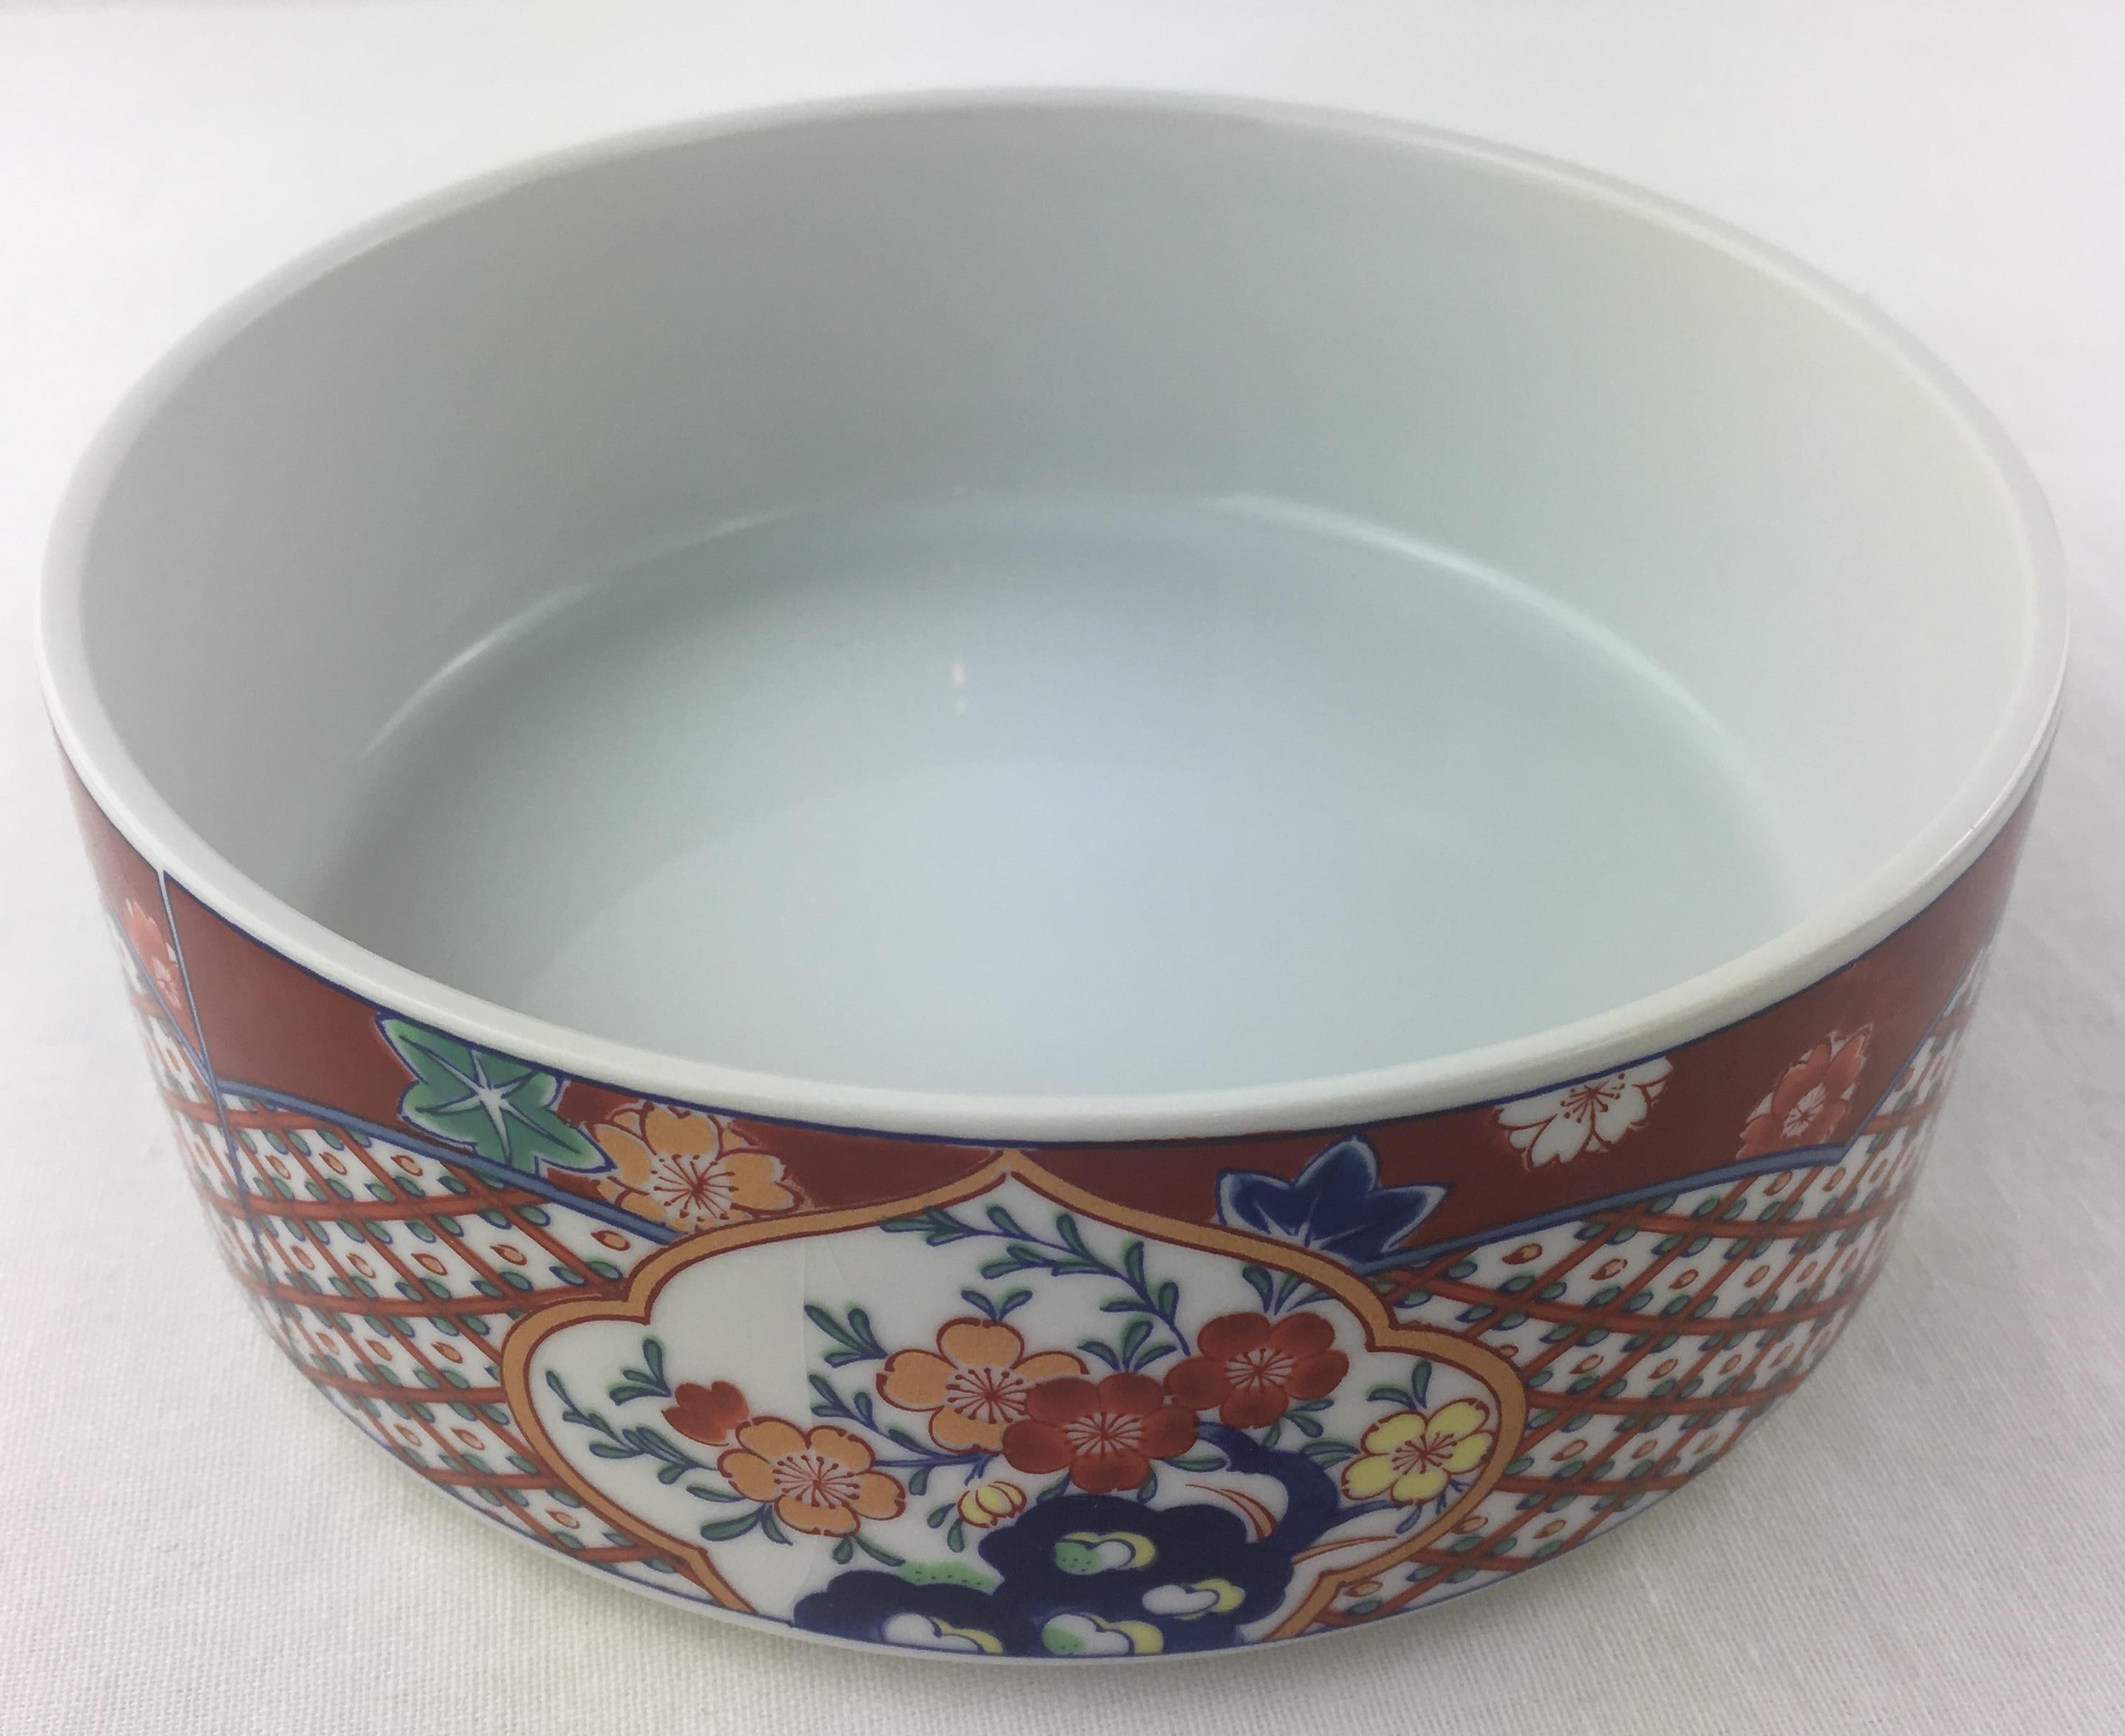 Japanese Hand-Painted Porcelain Lidded Serving Dish, Trinket or Jewelry Box In Good Condition For Sale In Miami, FL